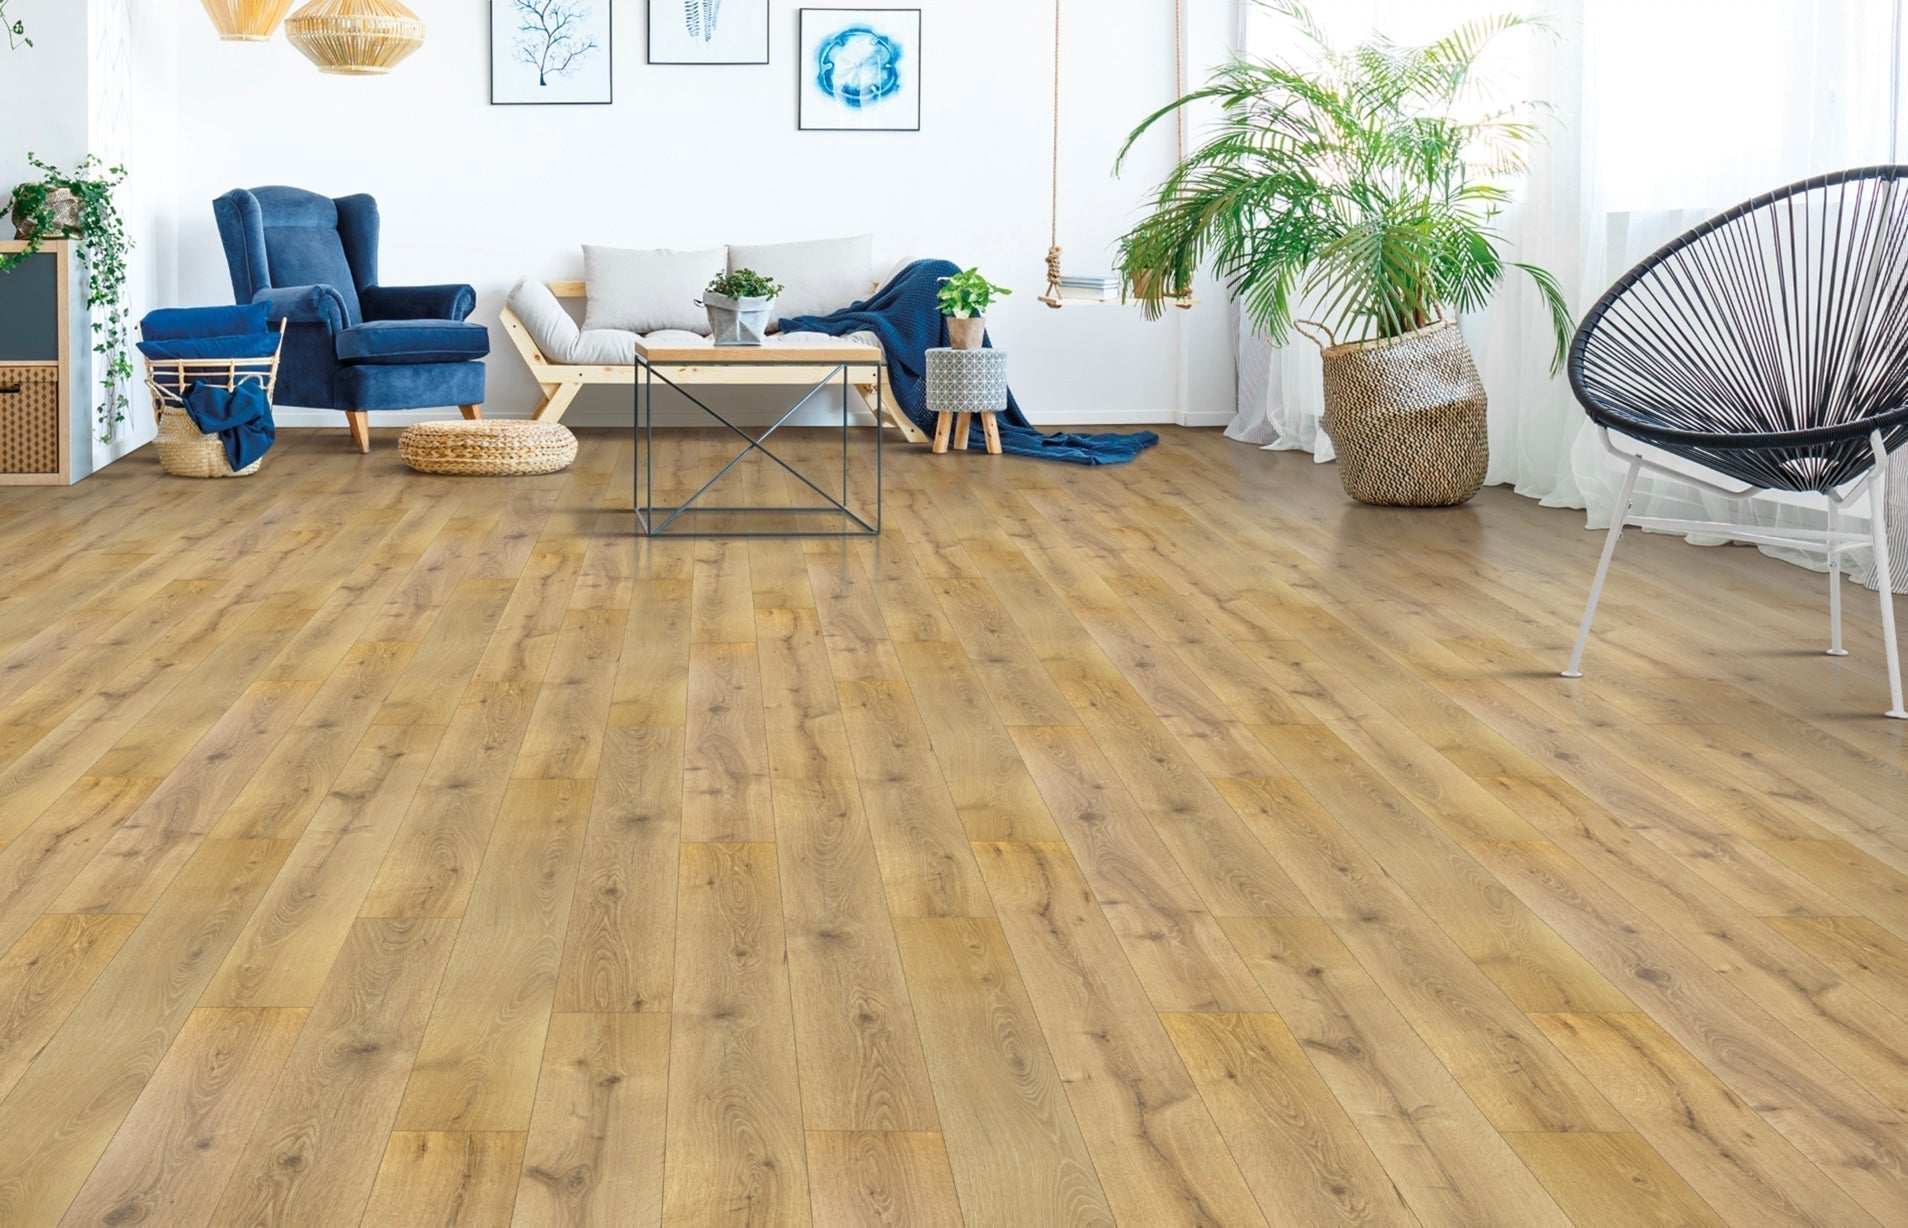 5 Myths About Laminate Flooring